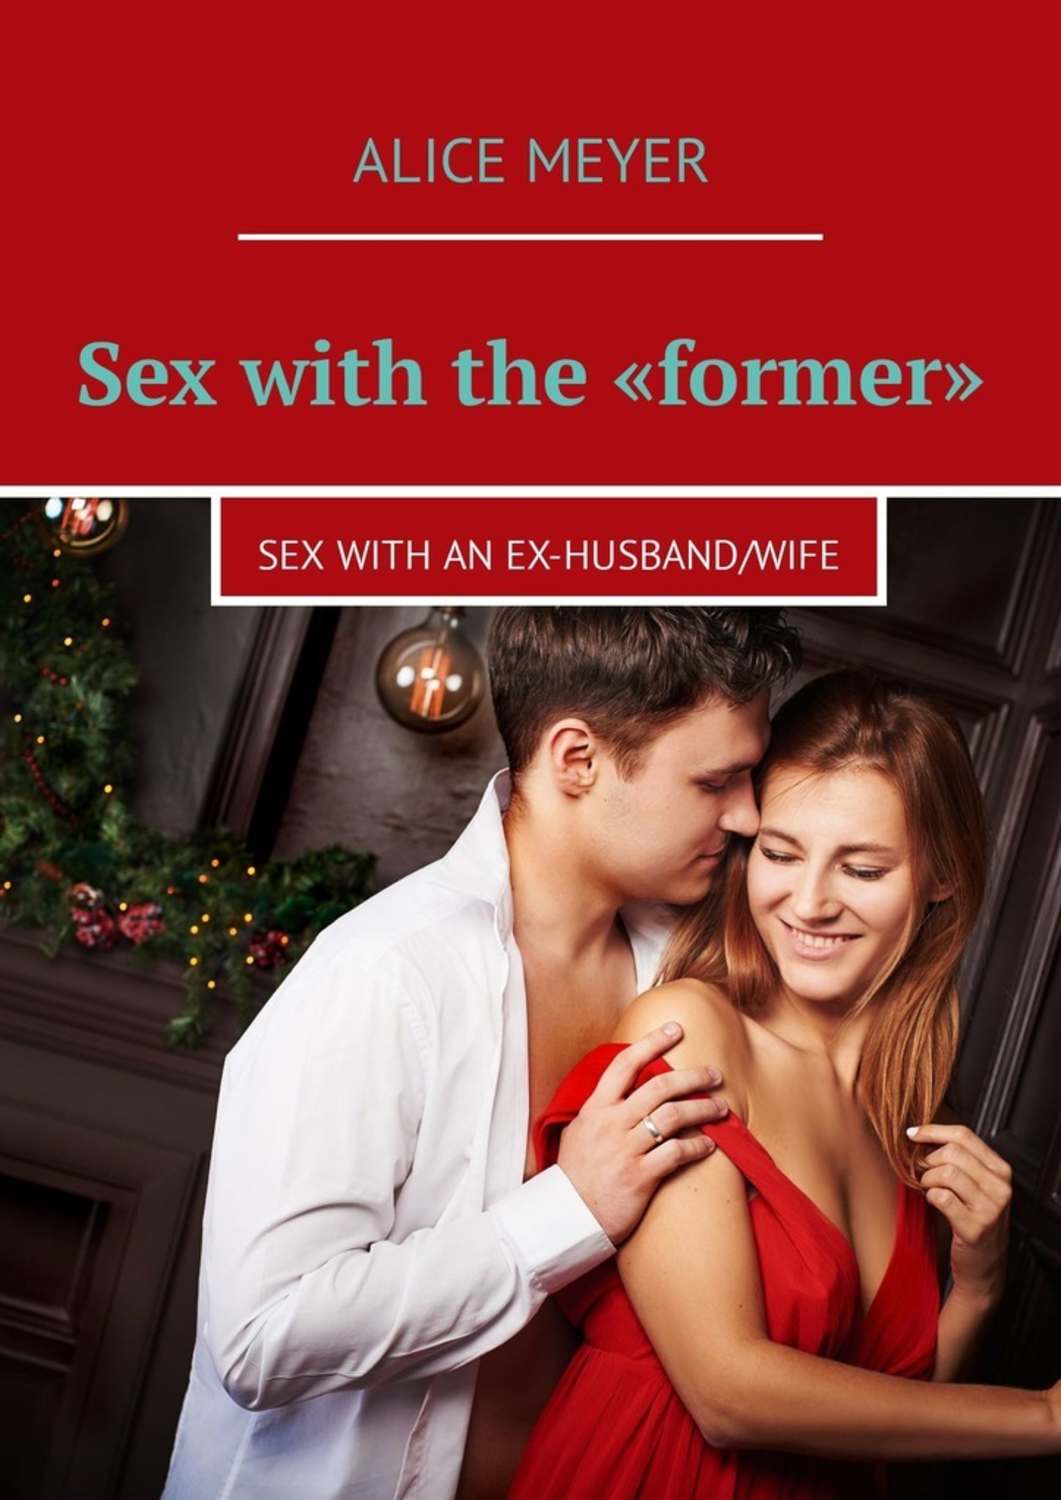 Alice Meyer, Sex with the «former» picture